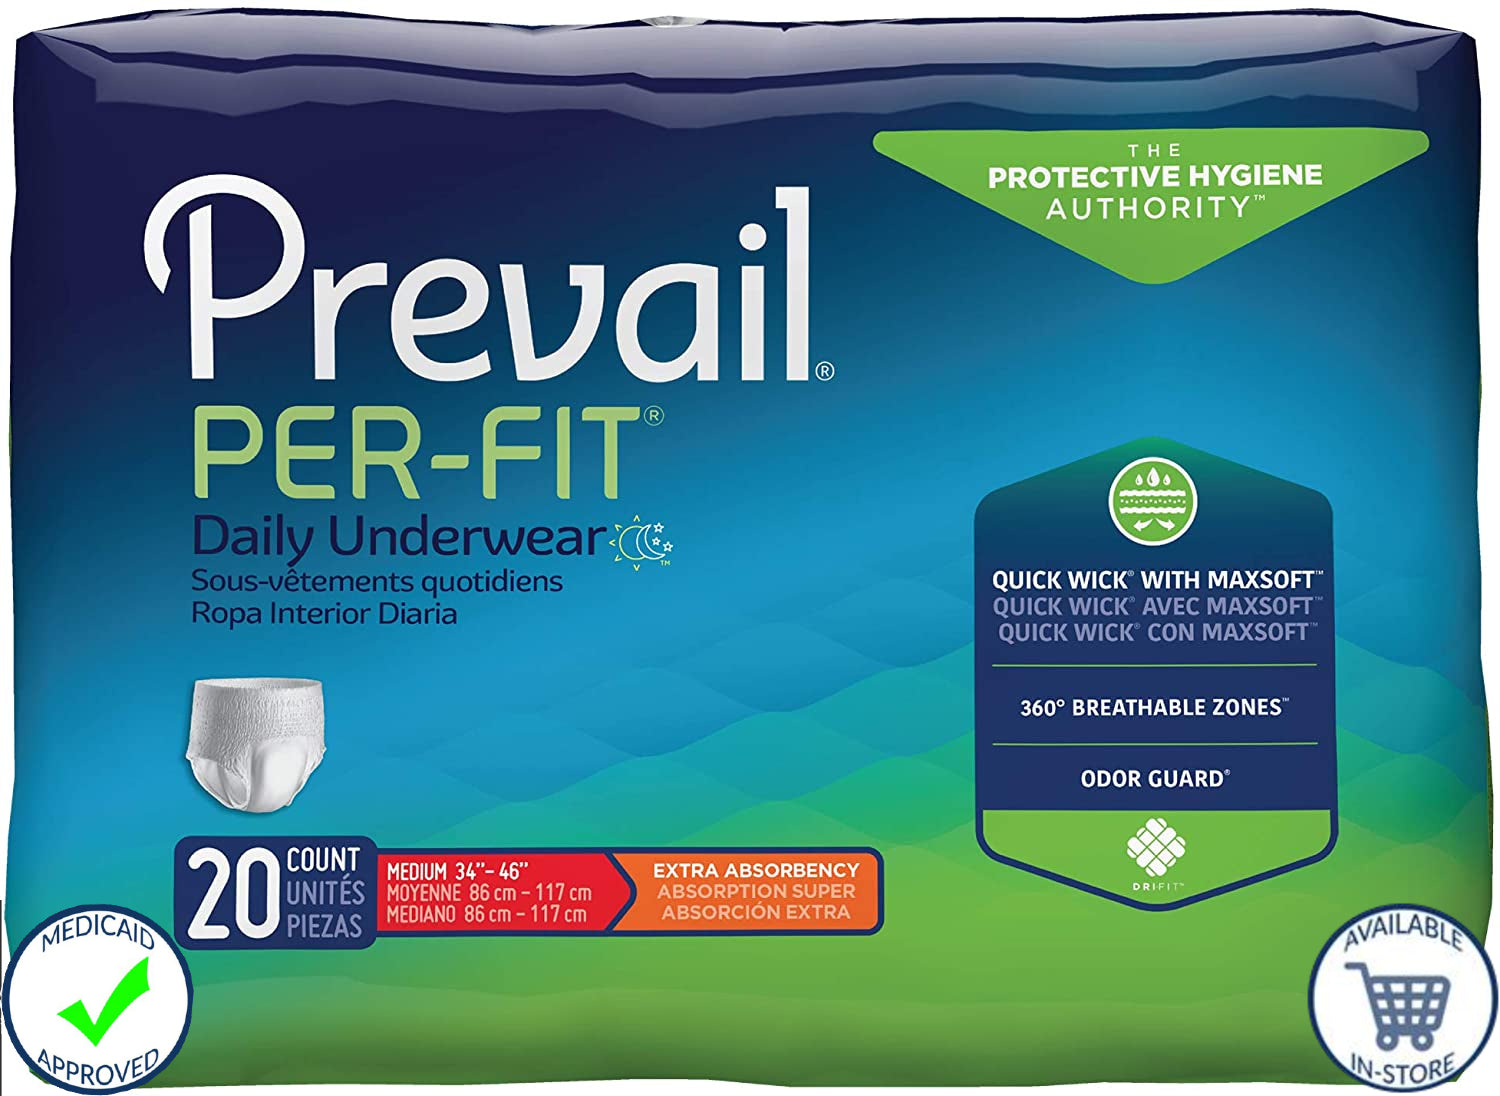 Simplicity Unisex Adult Disposable Underwear, Pull On, Moderate